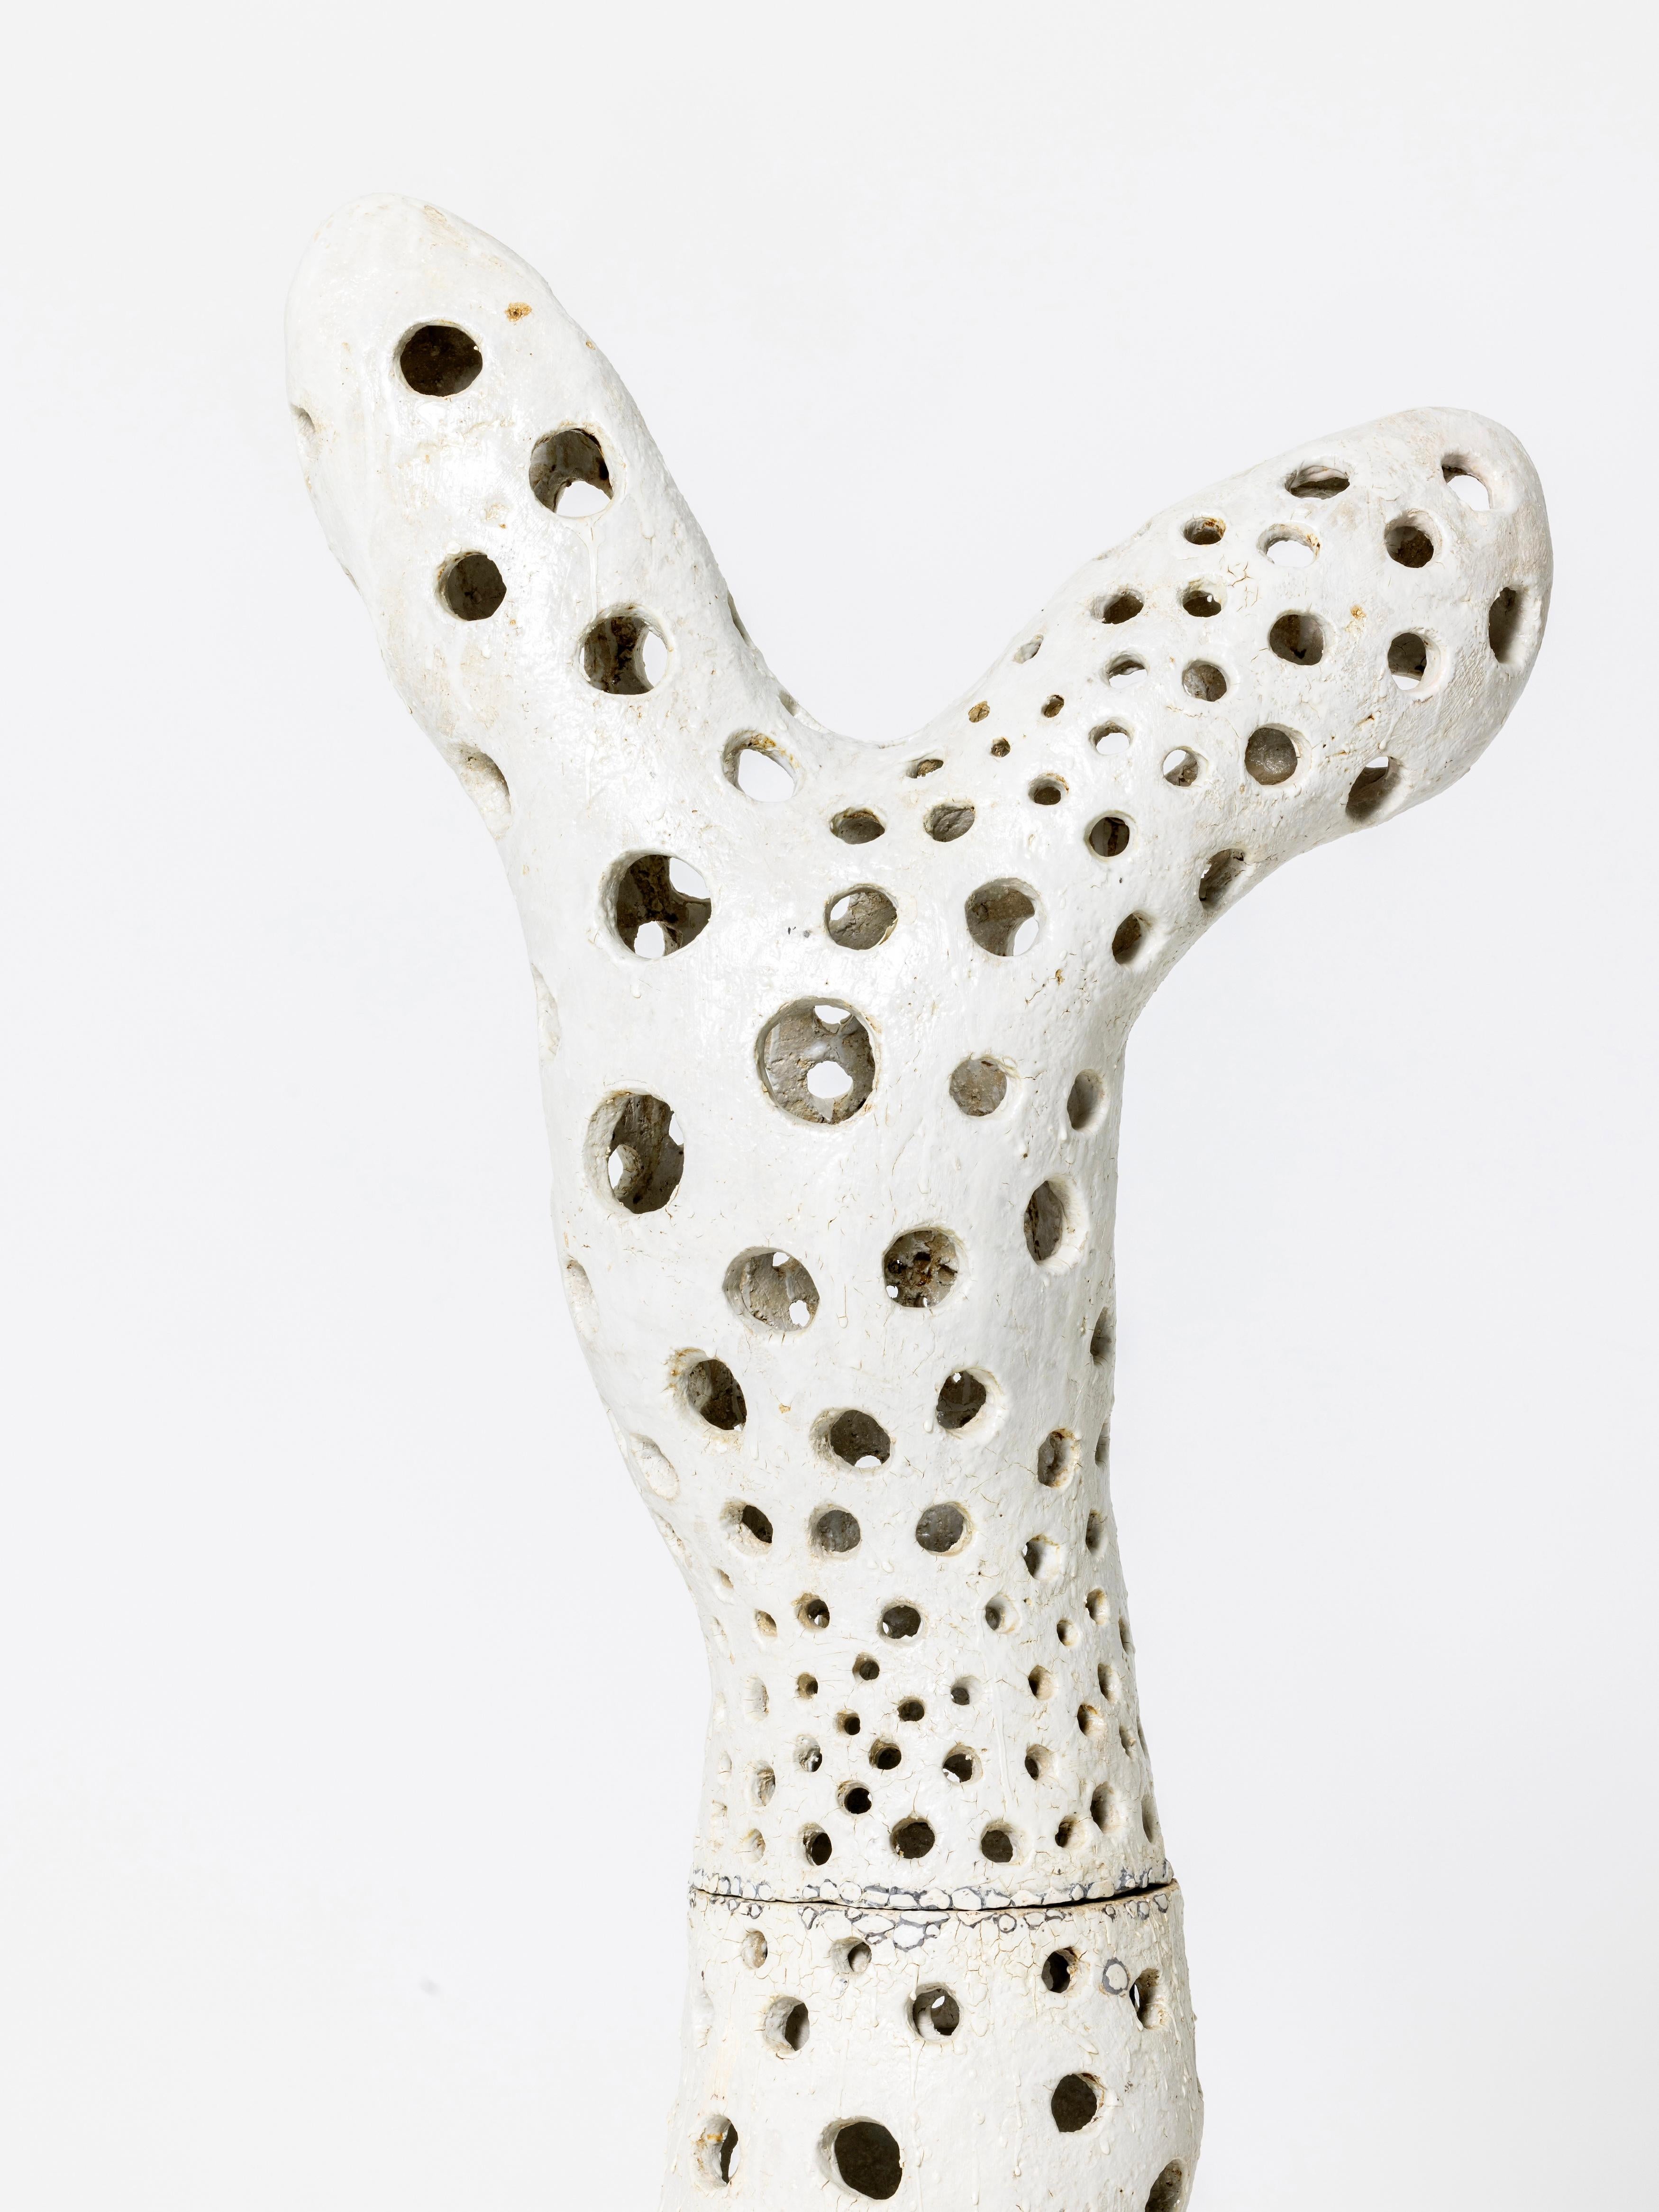 French Contemporary Ceramic Sculpture 